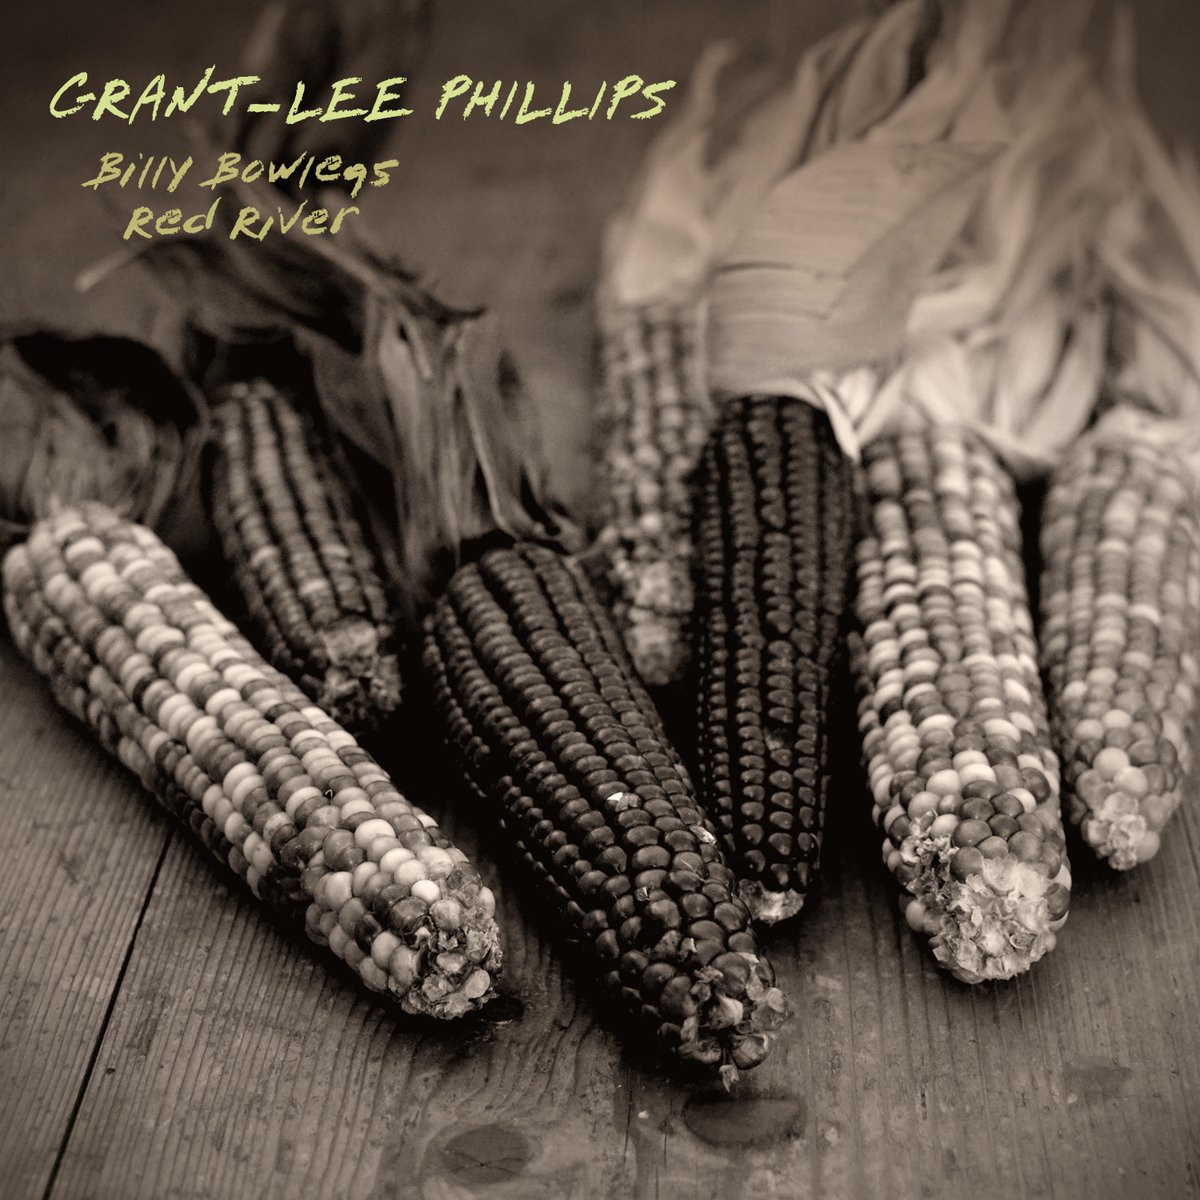 Check out @GrantLeeTweets’ new single – “Red River” & “Billy Bowlegs” – out now on @AppleMusic 🌽 ffm.to/billybowlegsre…